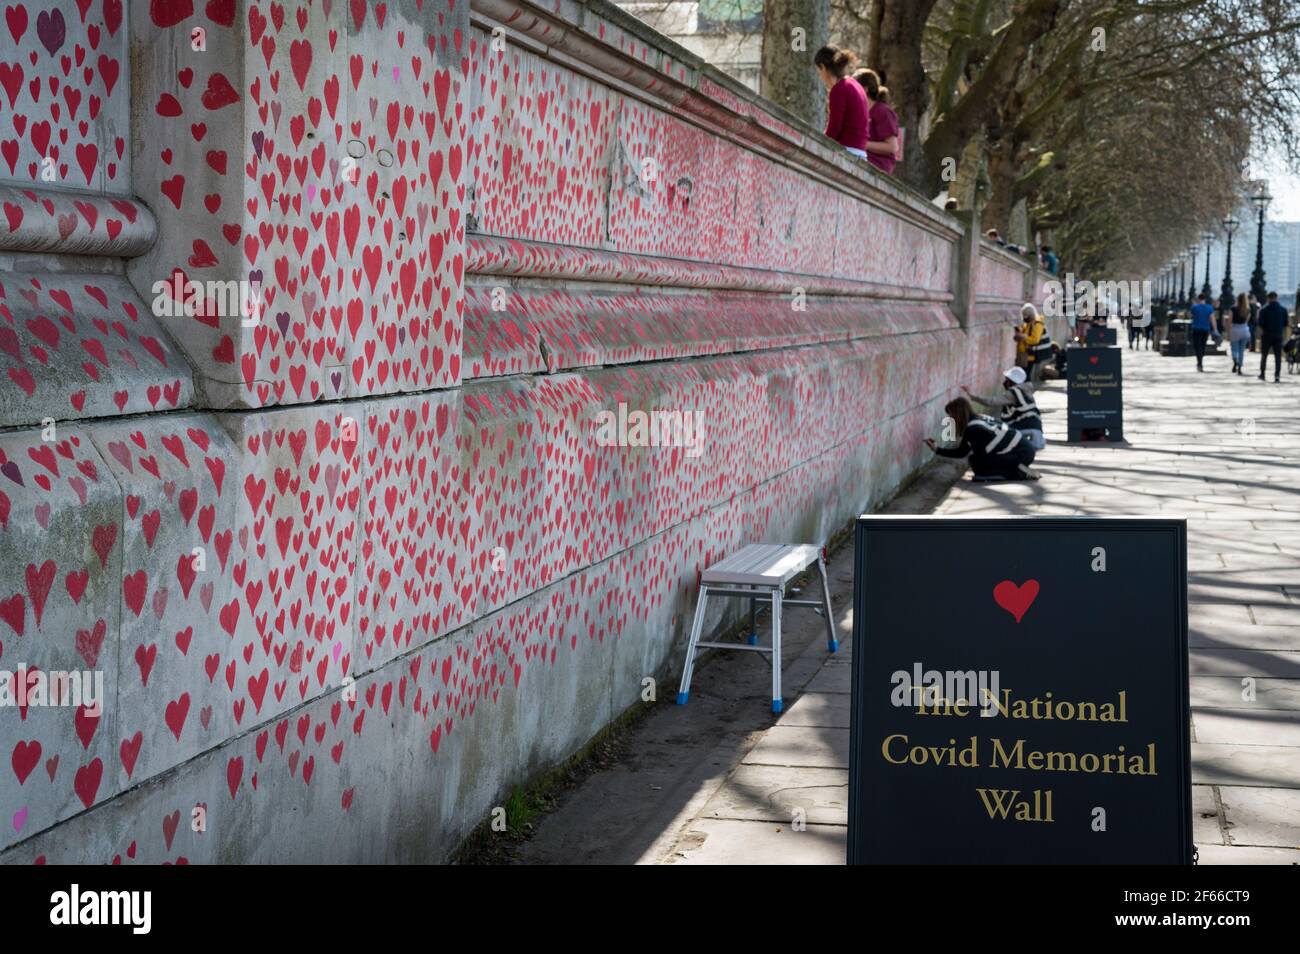 London, UK. 30th Mar, 2021. A sign for a wall of hearts at The National Covid Memorial Wall in Lambeth by the River Thames, with each heart representing someone who died during the UK's ongoing coronavirus pandemic. Called The National Covid Memorial Wall, it has been created by the Covid-19 Bereaved Families for Justice and will extend for half a mile by the time it is complete. Credit: Stephen Chung/Alamy Live News Stock Photo